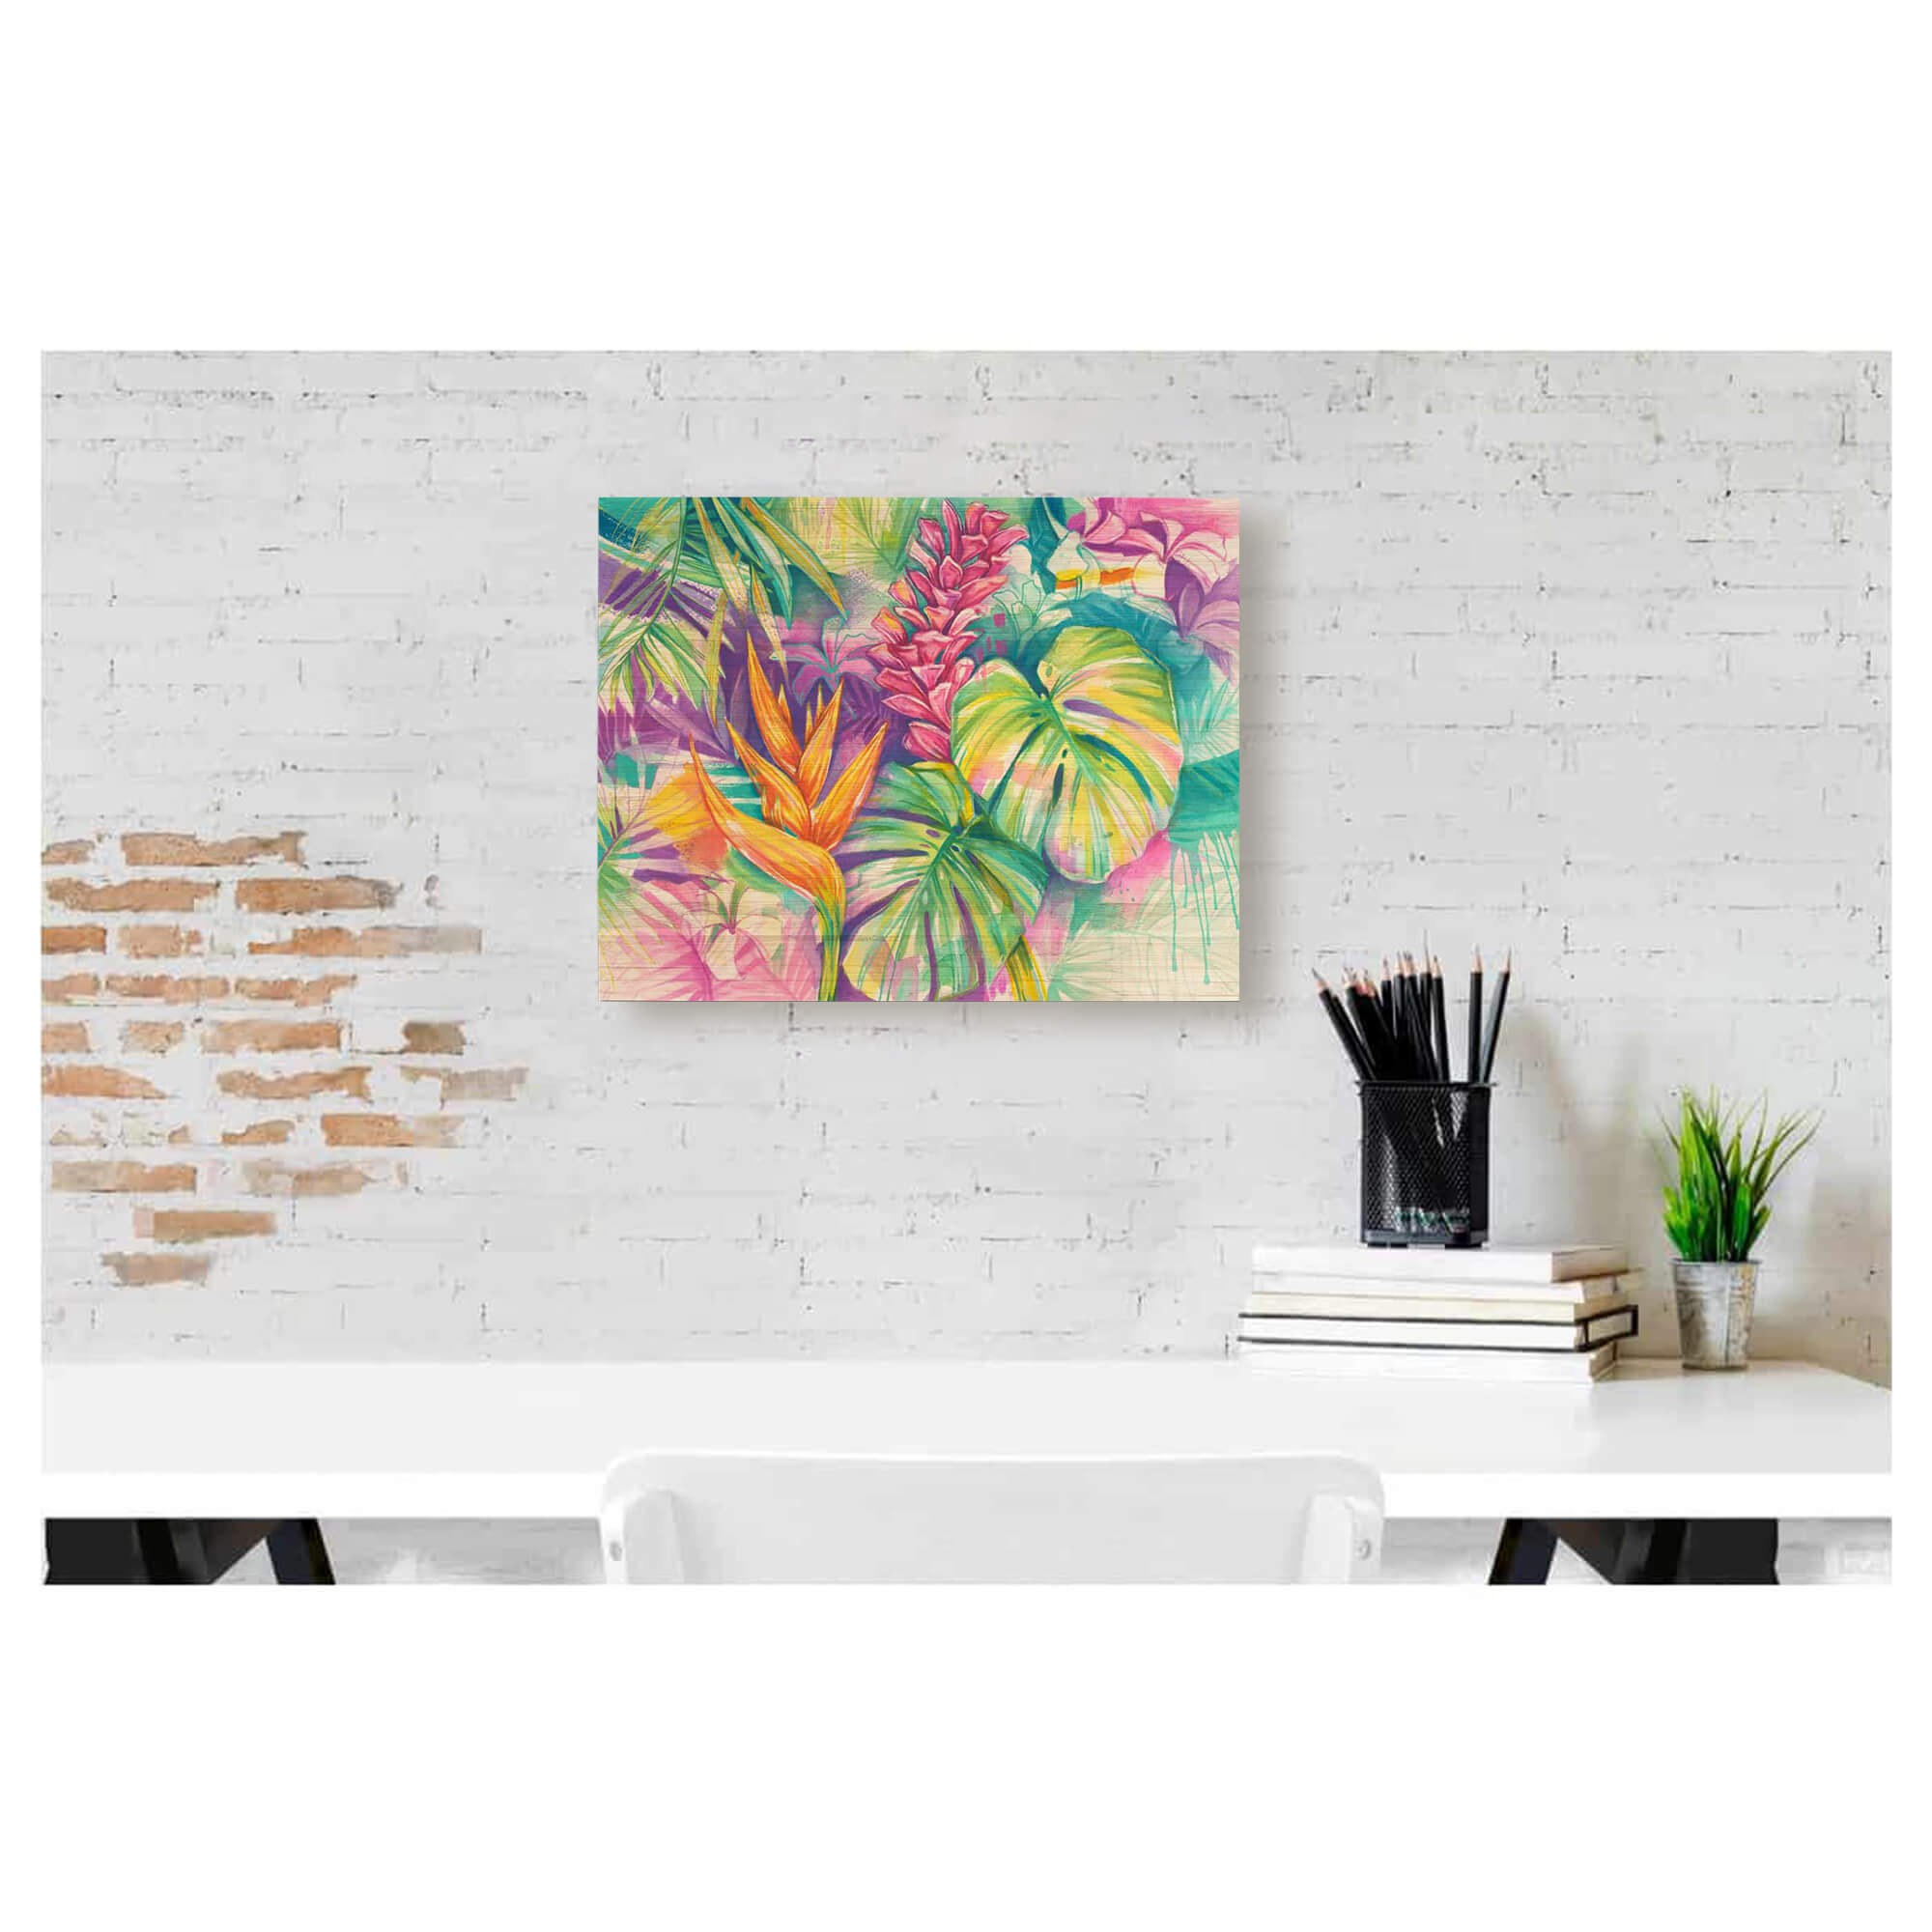 Bamboo print of many shapes and hues of tropical island flora by Hawaii artist Lauren Roth